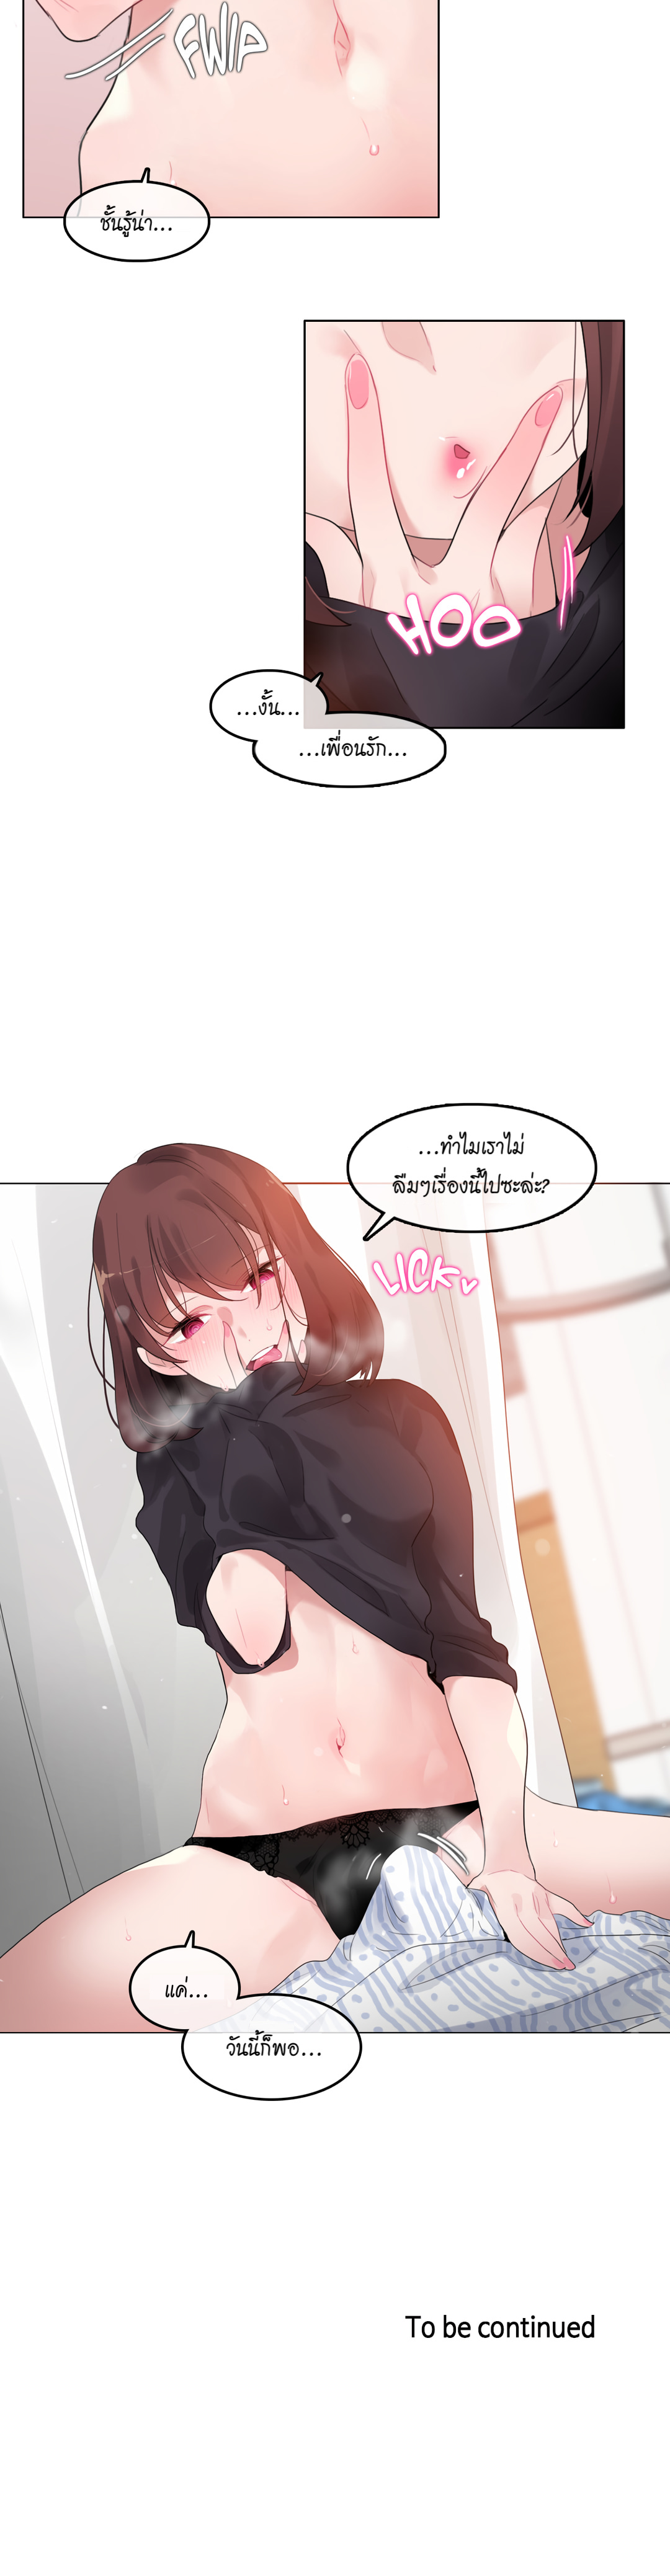 A Pervert’s Daily Life50 (18)